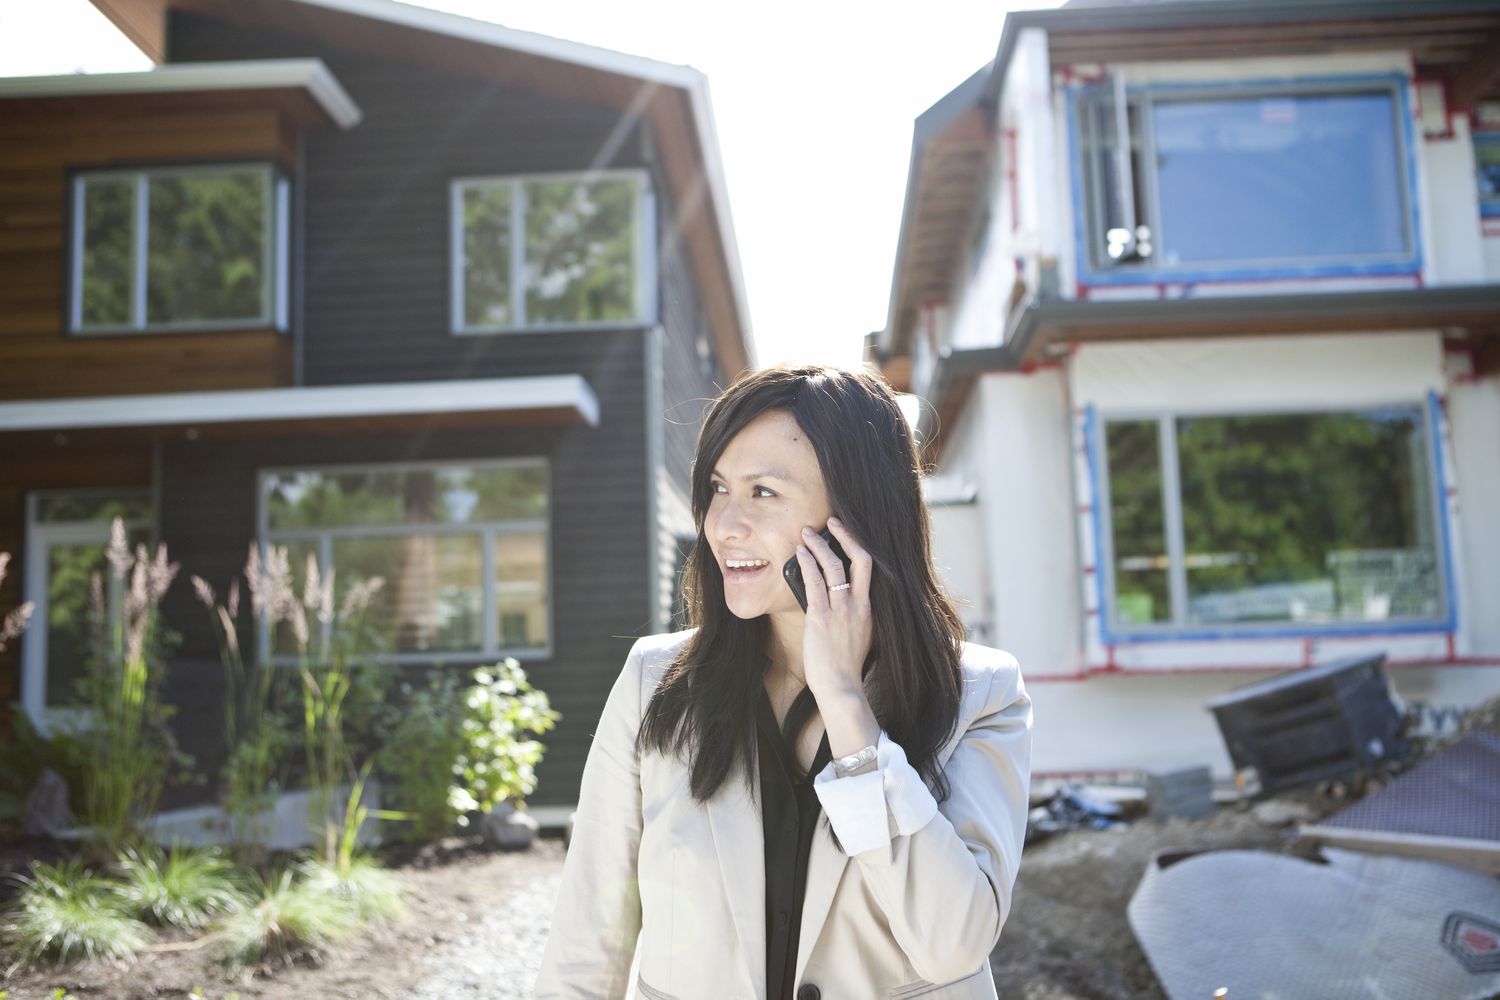 How Long Does It Take To Hear From Buyers After An Inspection?